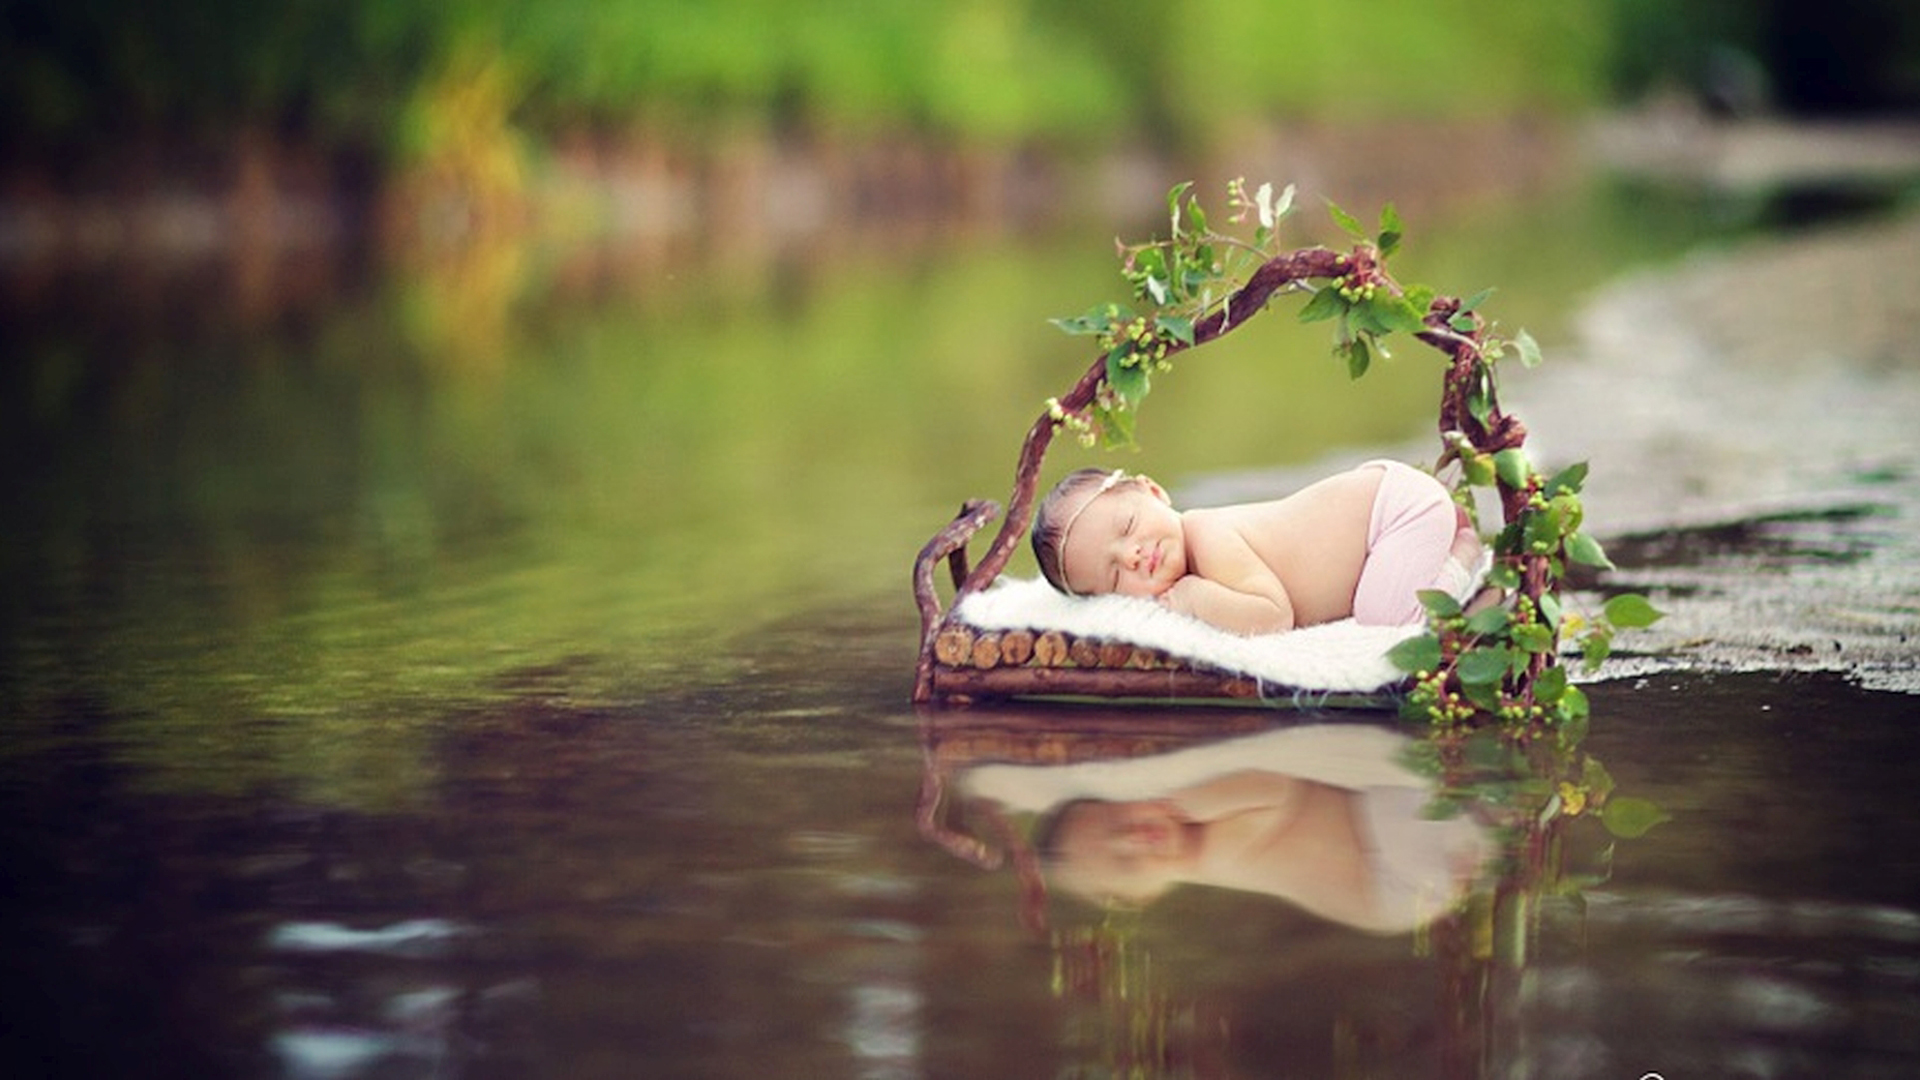 Baby Child Is Sleeping On White Cloth Reflection On Water HD